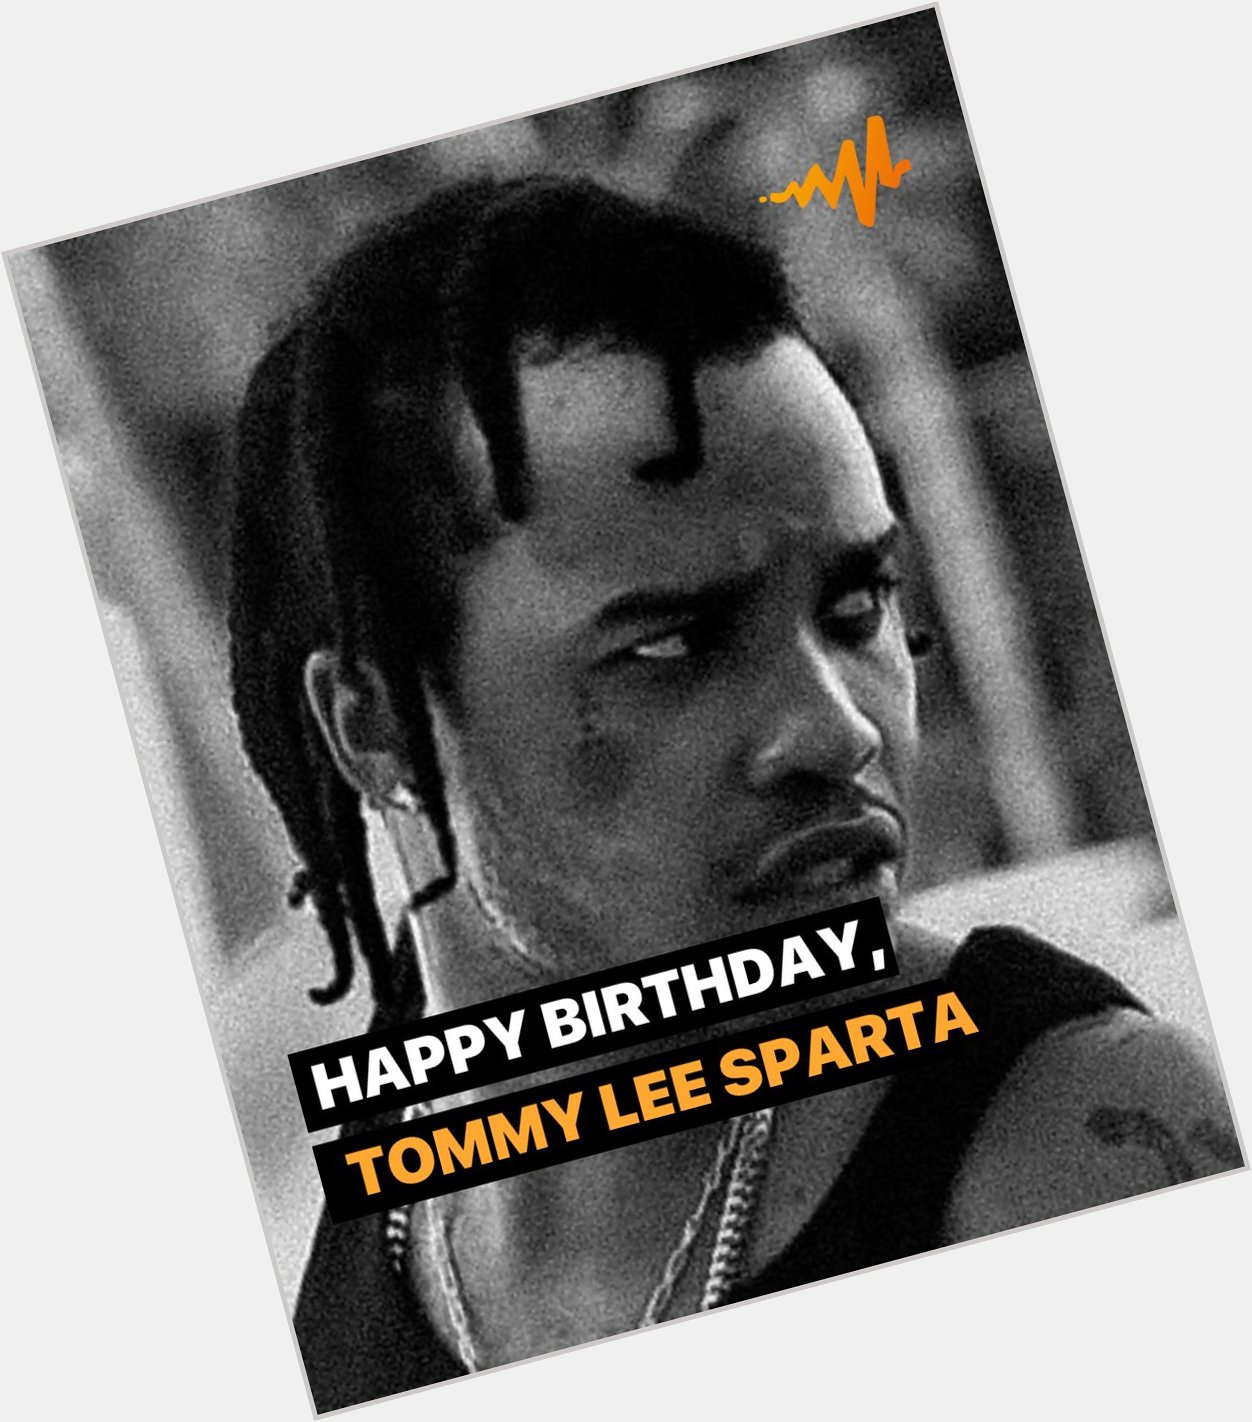 Happy Birthday Tommy Lee Sparta!
What s your favorite Tommy Lee Track?    